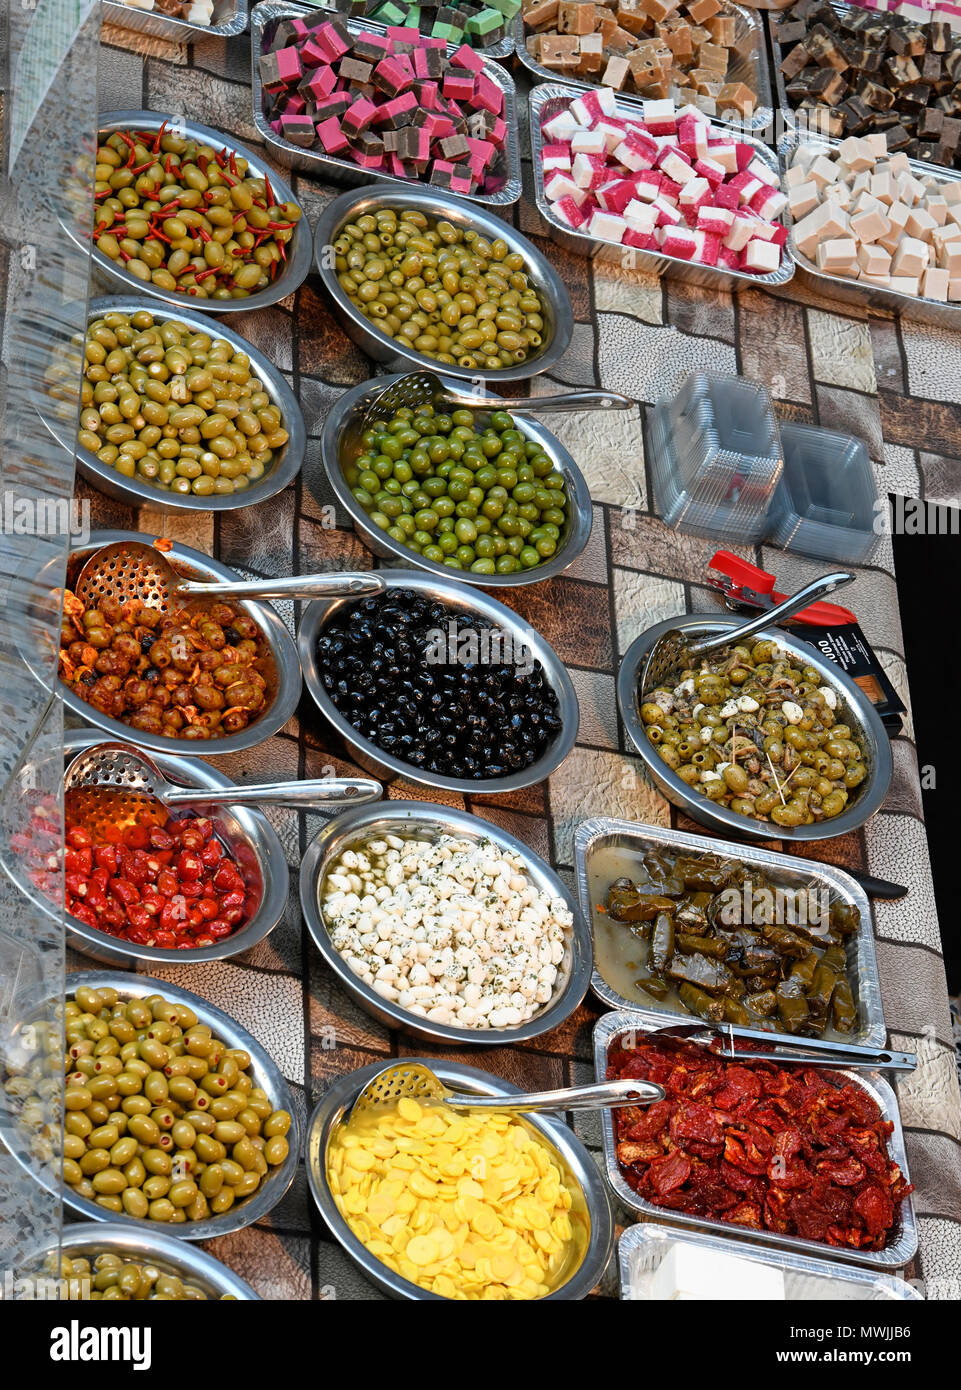 traditional greek food stall Stock Photo